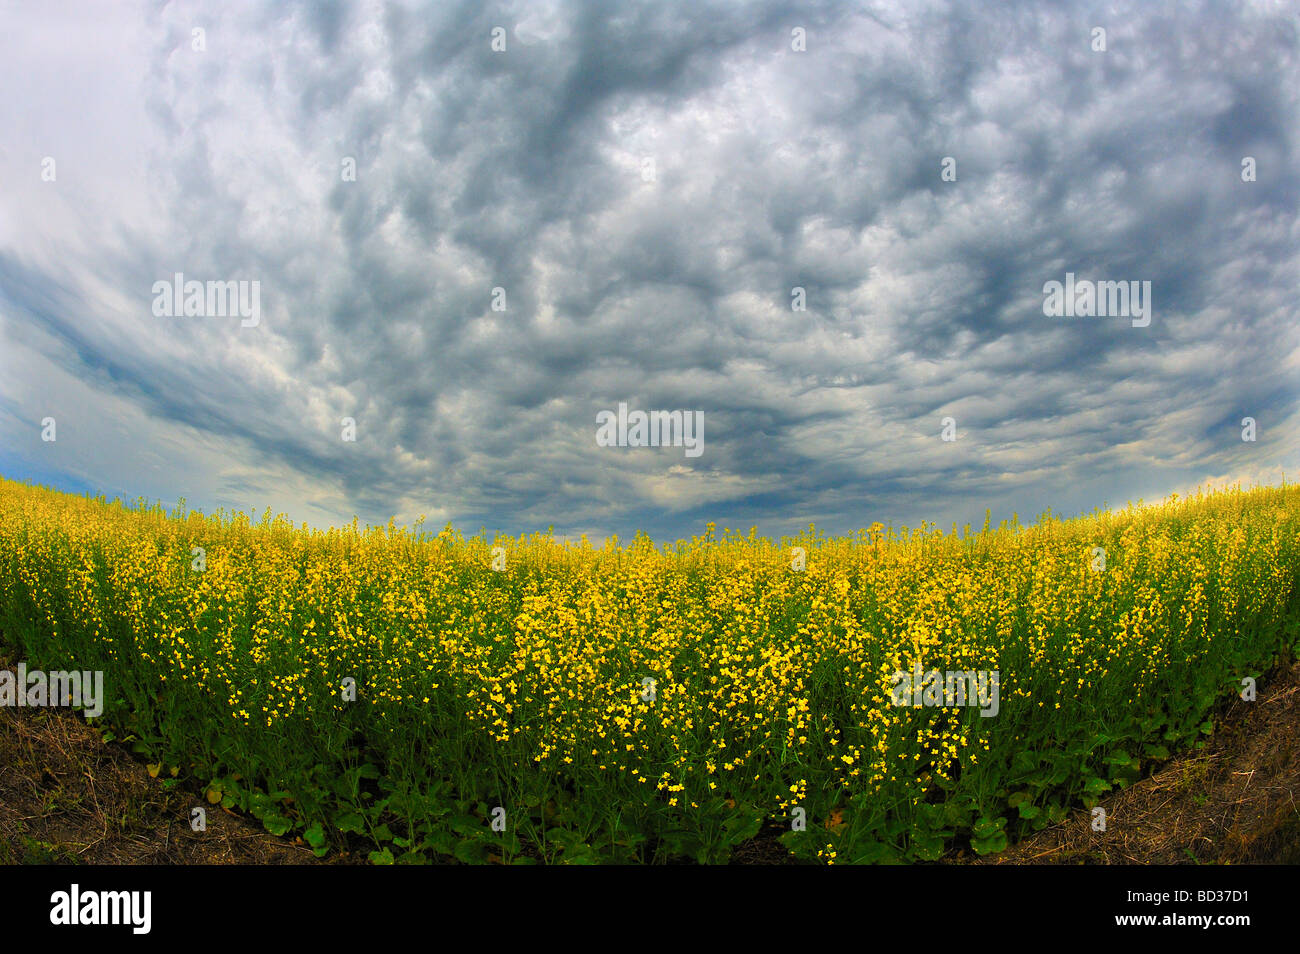 Storm clouds and canola crop Stock Photo